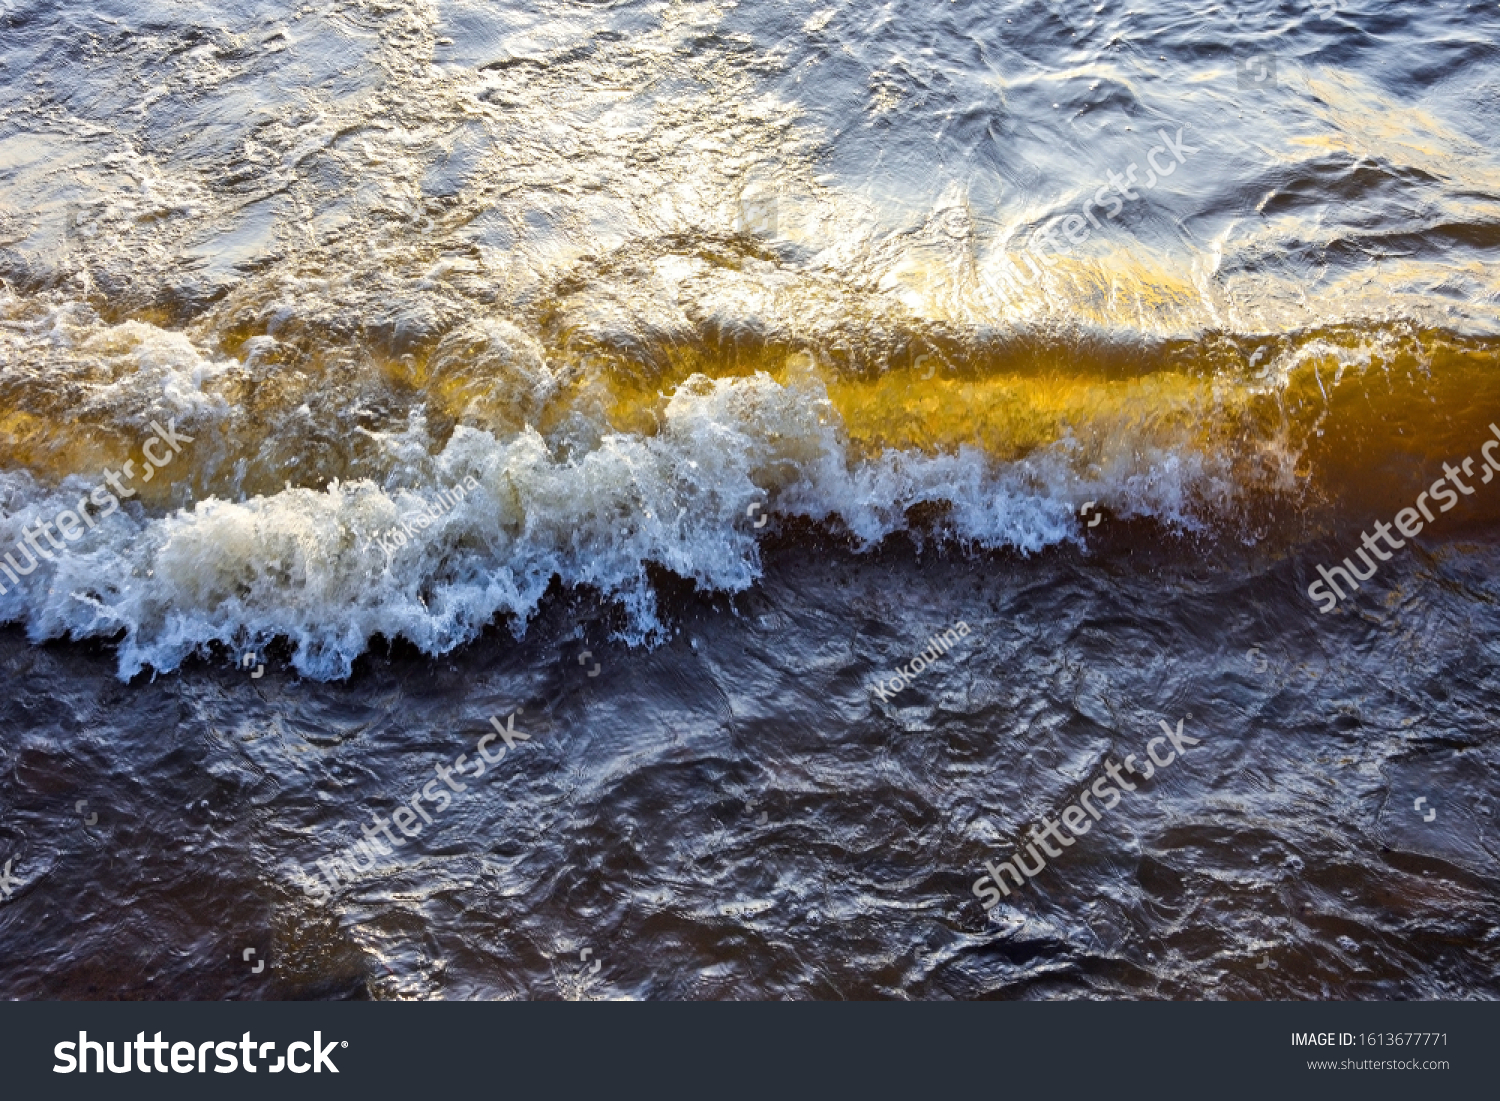 Golden wave as a background. Sea wave, Ocean wave #1613677771